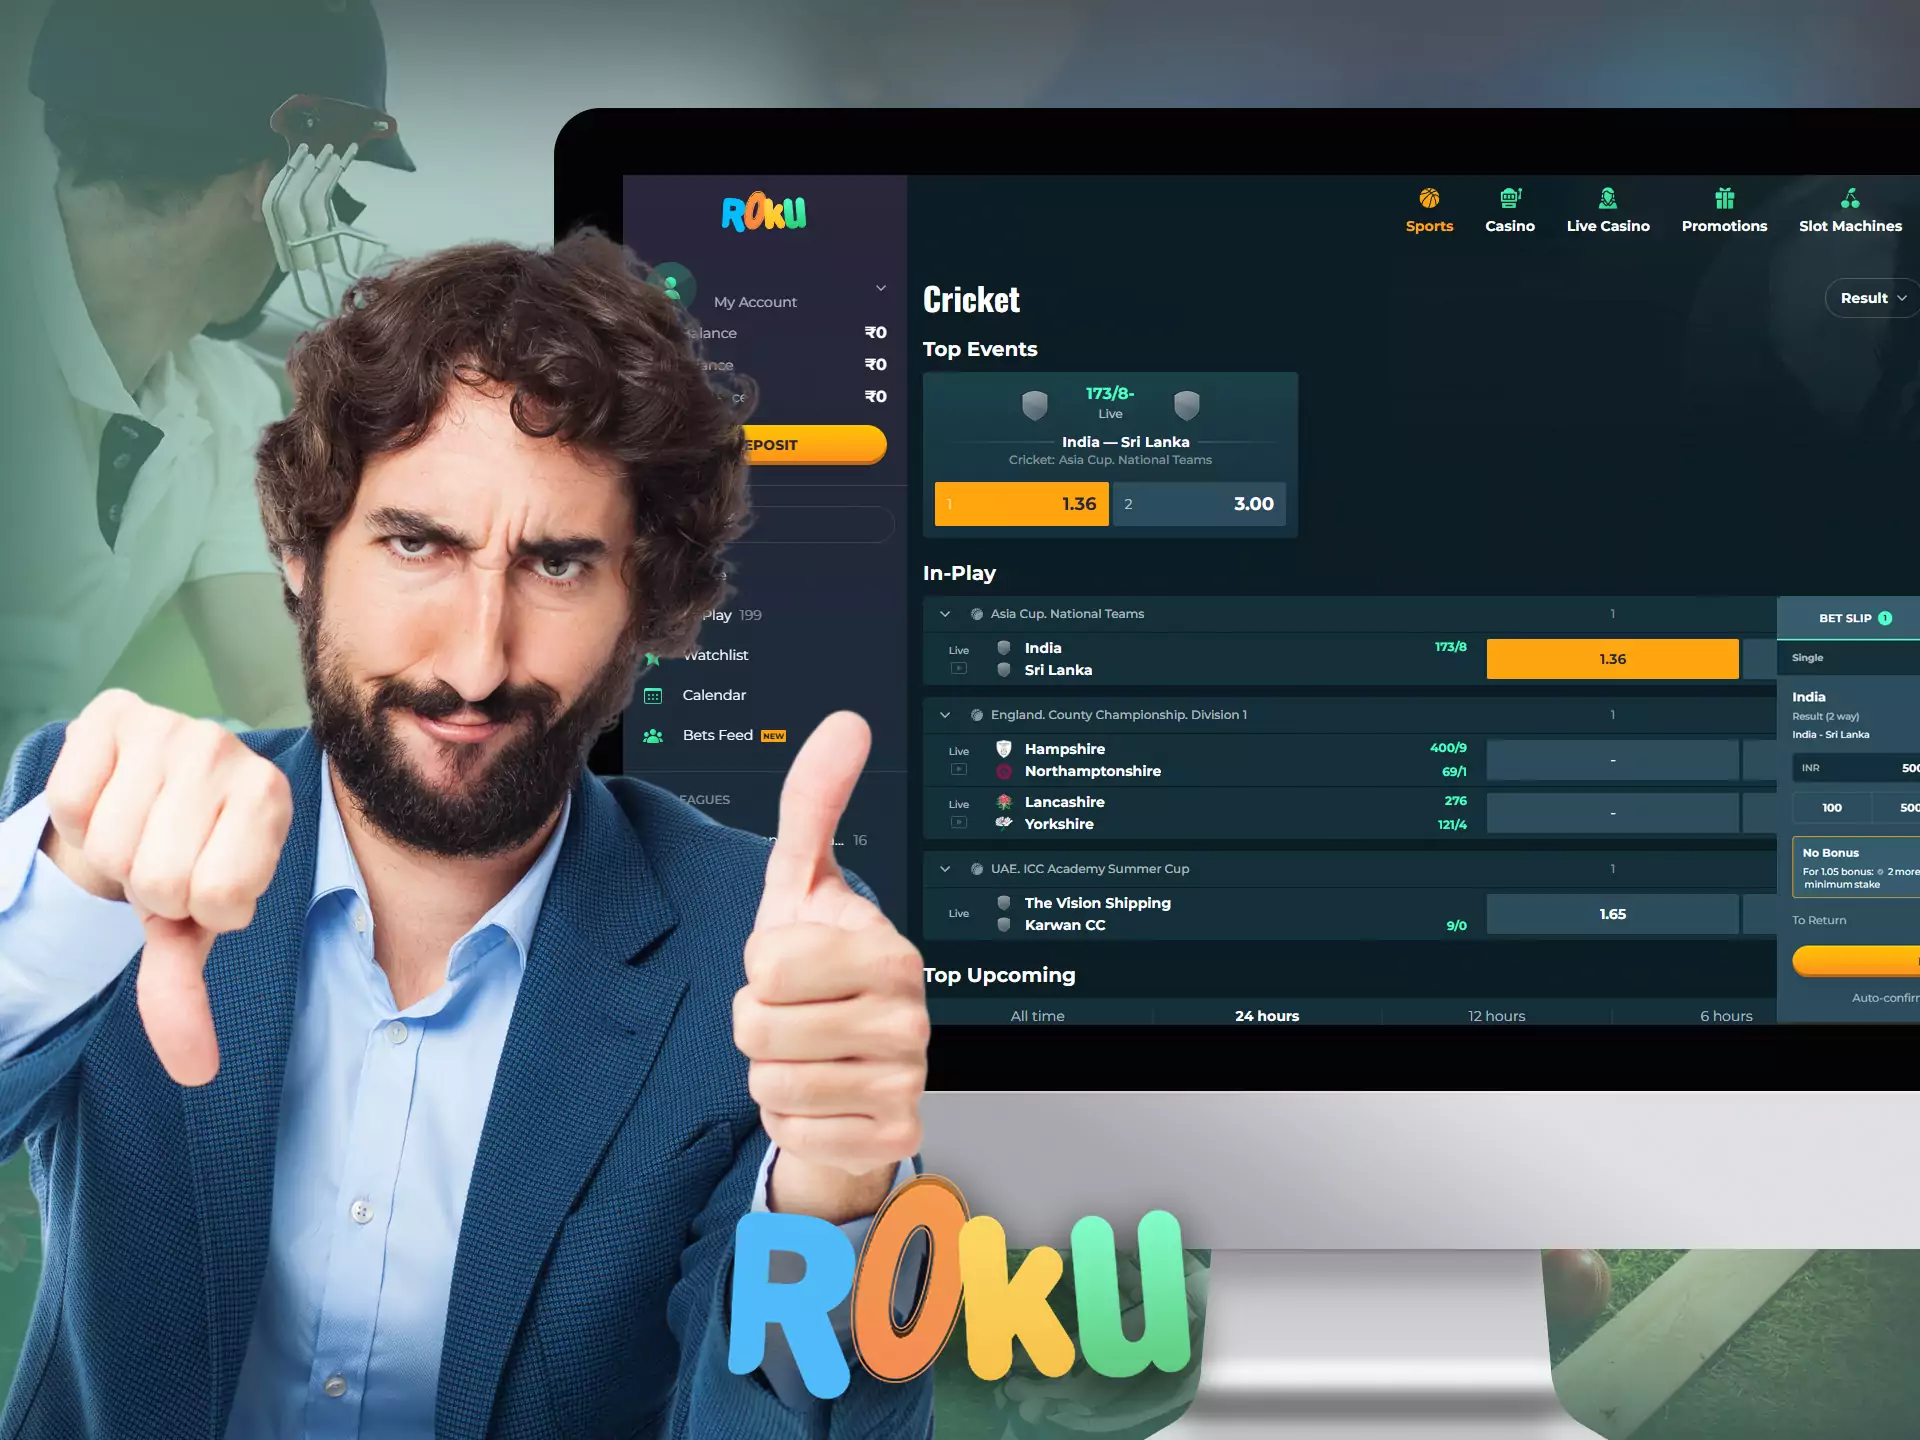 Of course, there are some upsides of Rokubet you should know about.